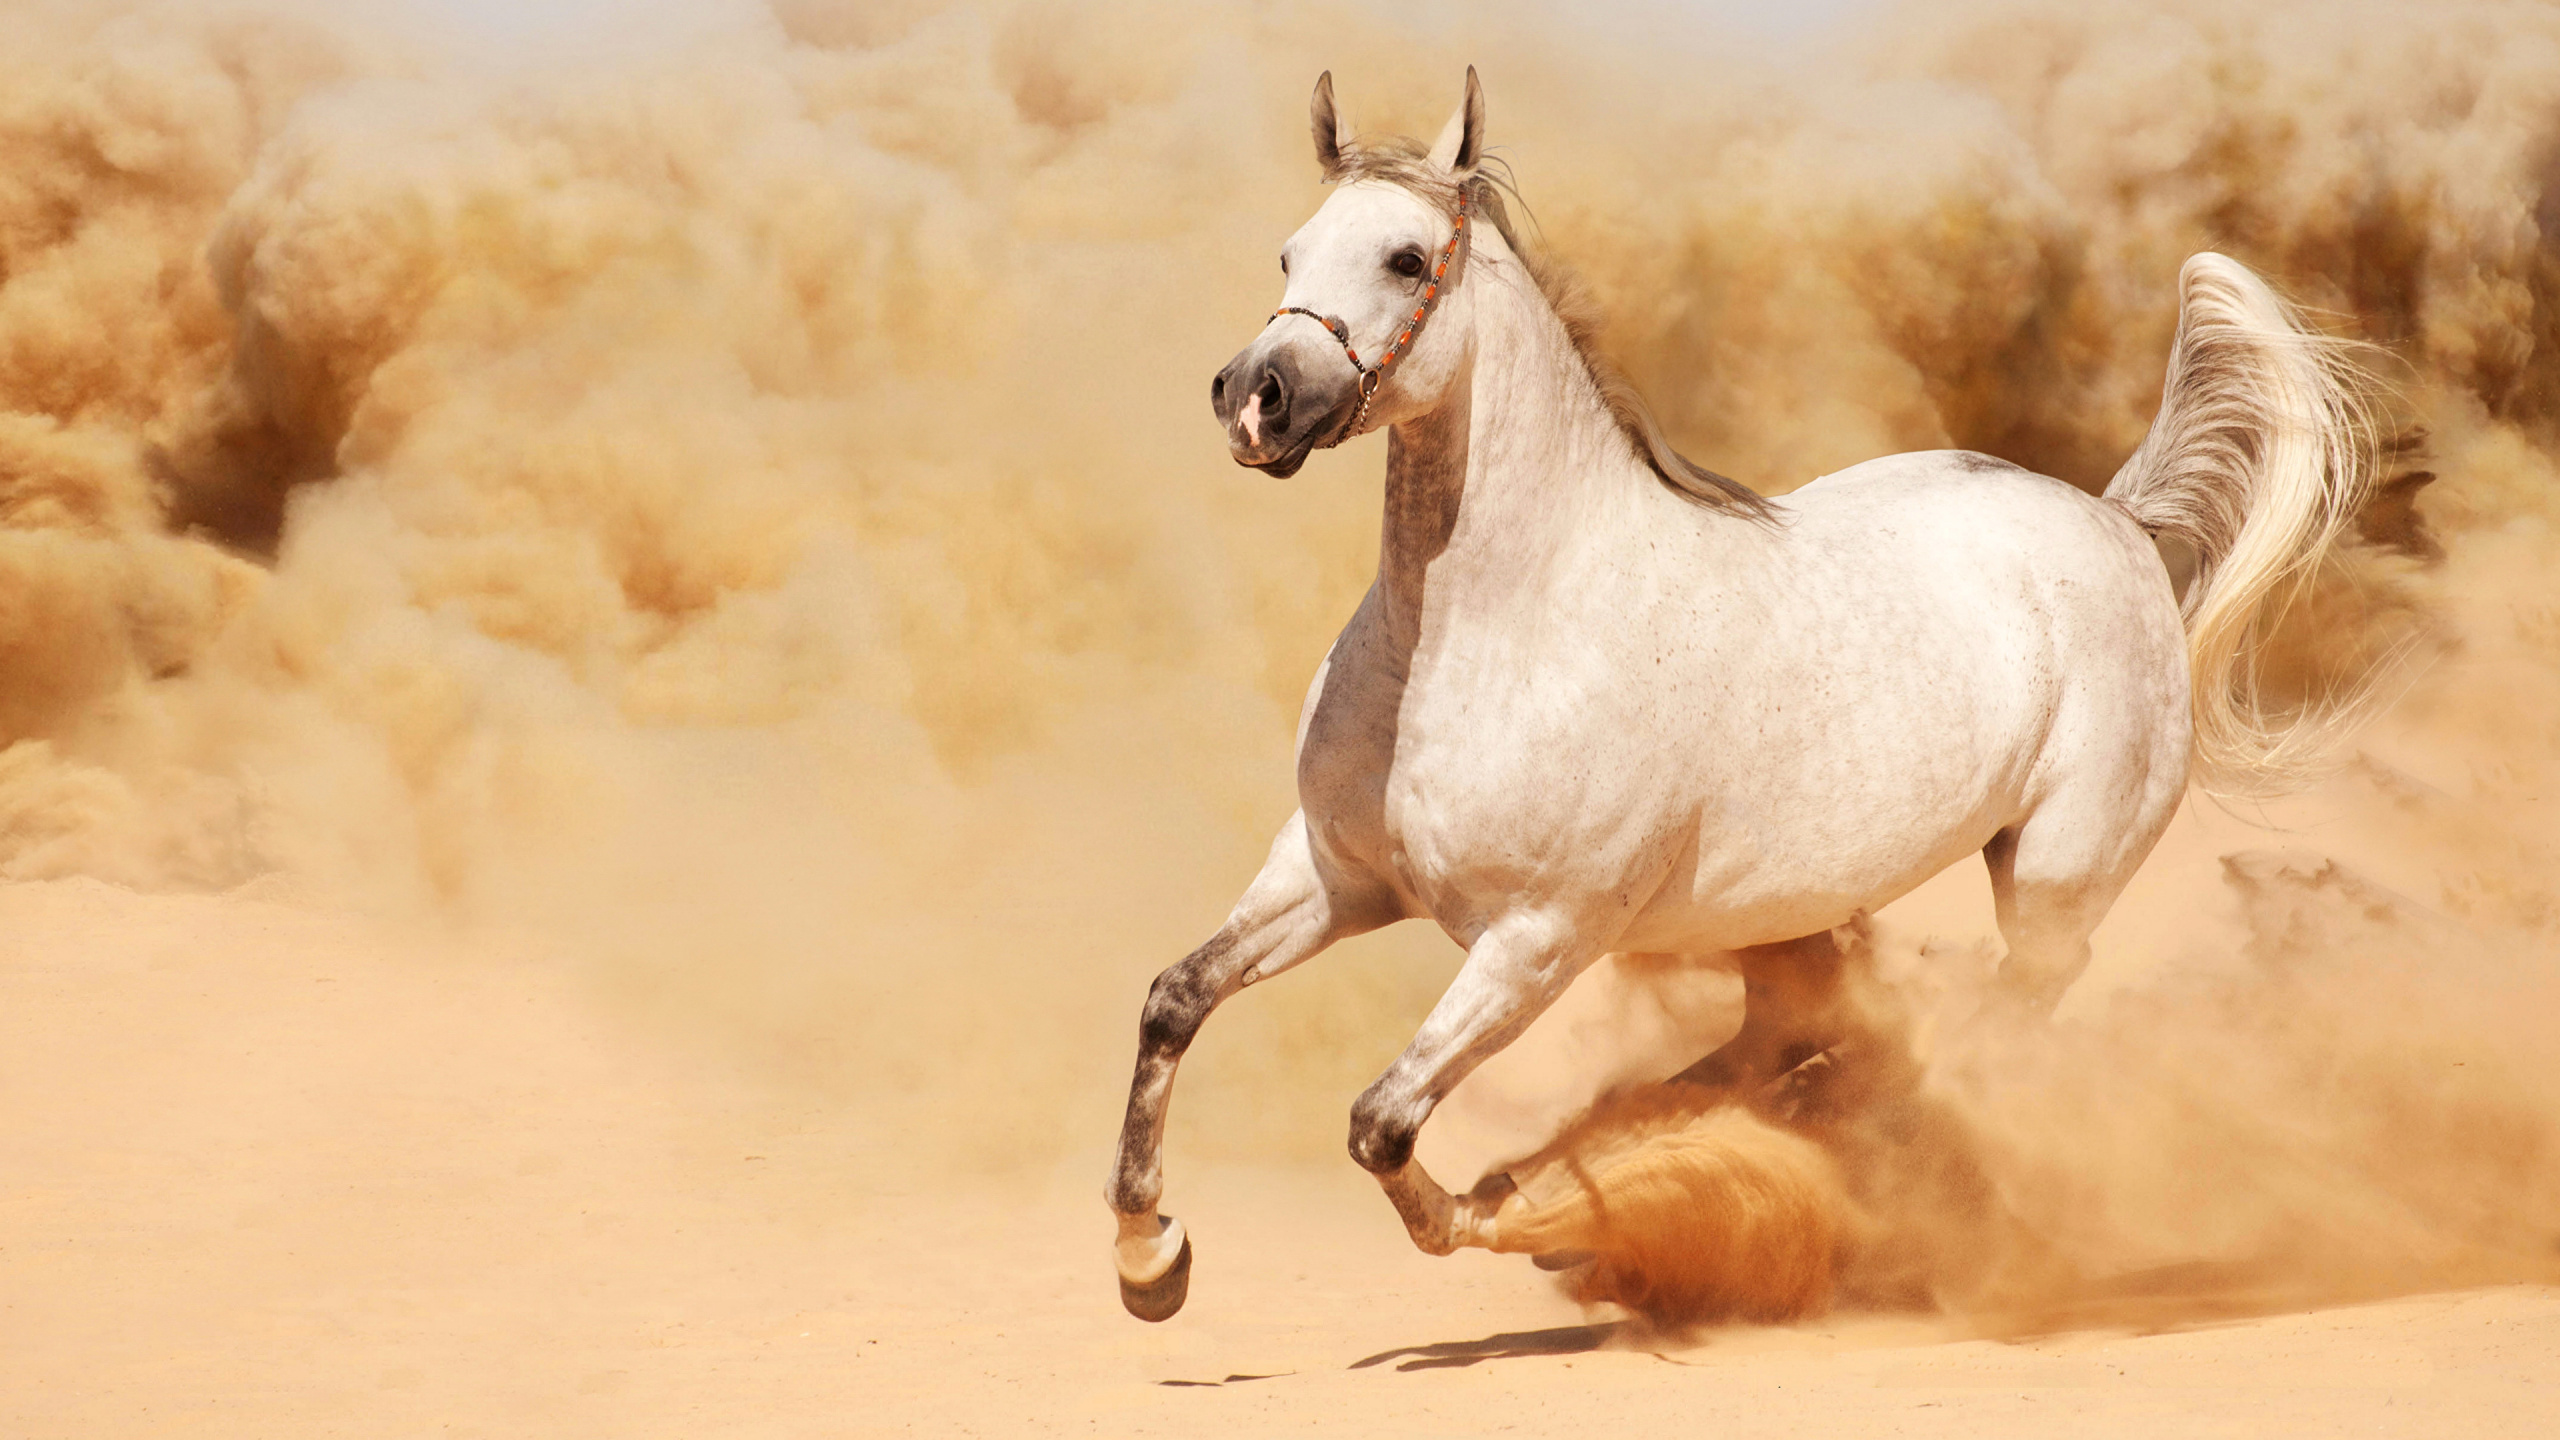 White Horse Running on Brown Sand During Daytime. Wallpaper in 2560x1440 Resolution